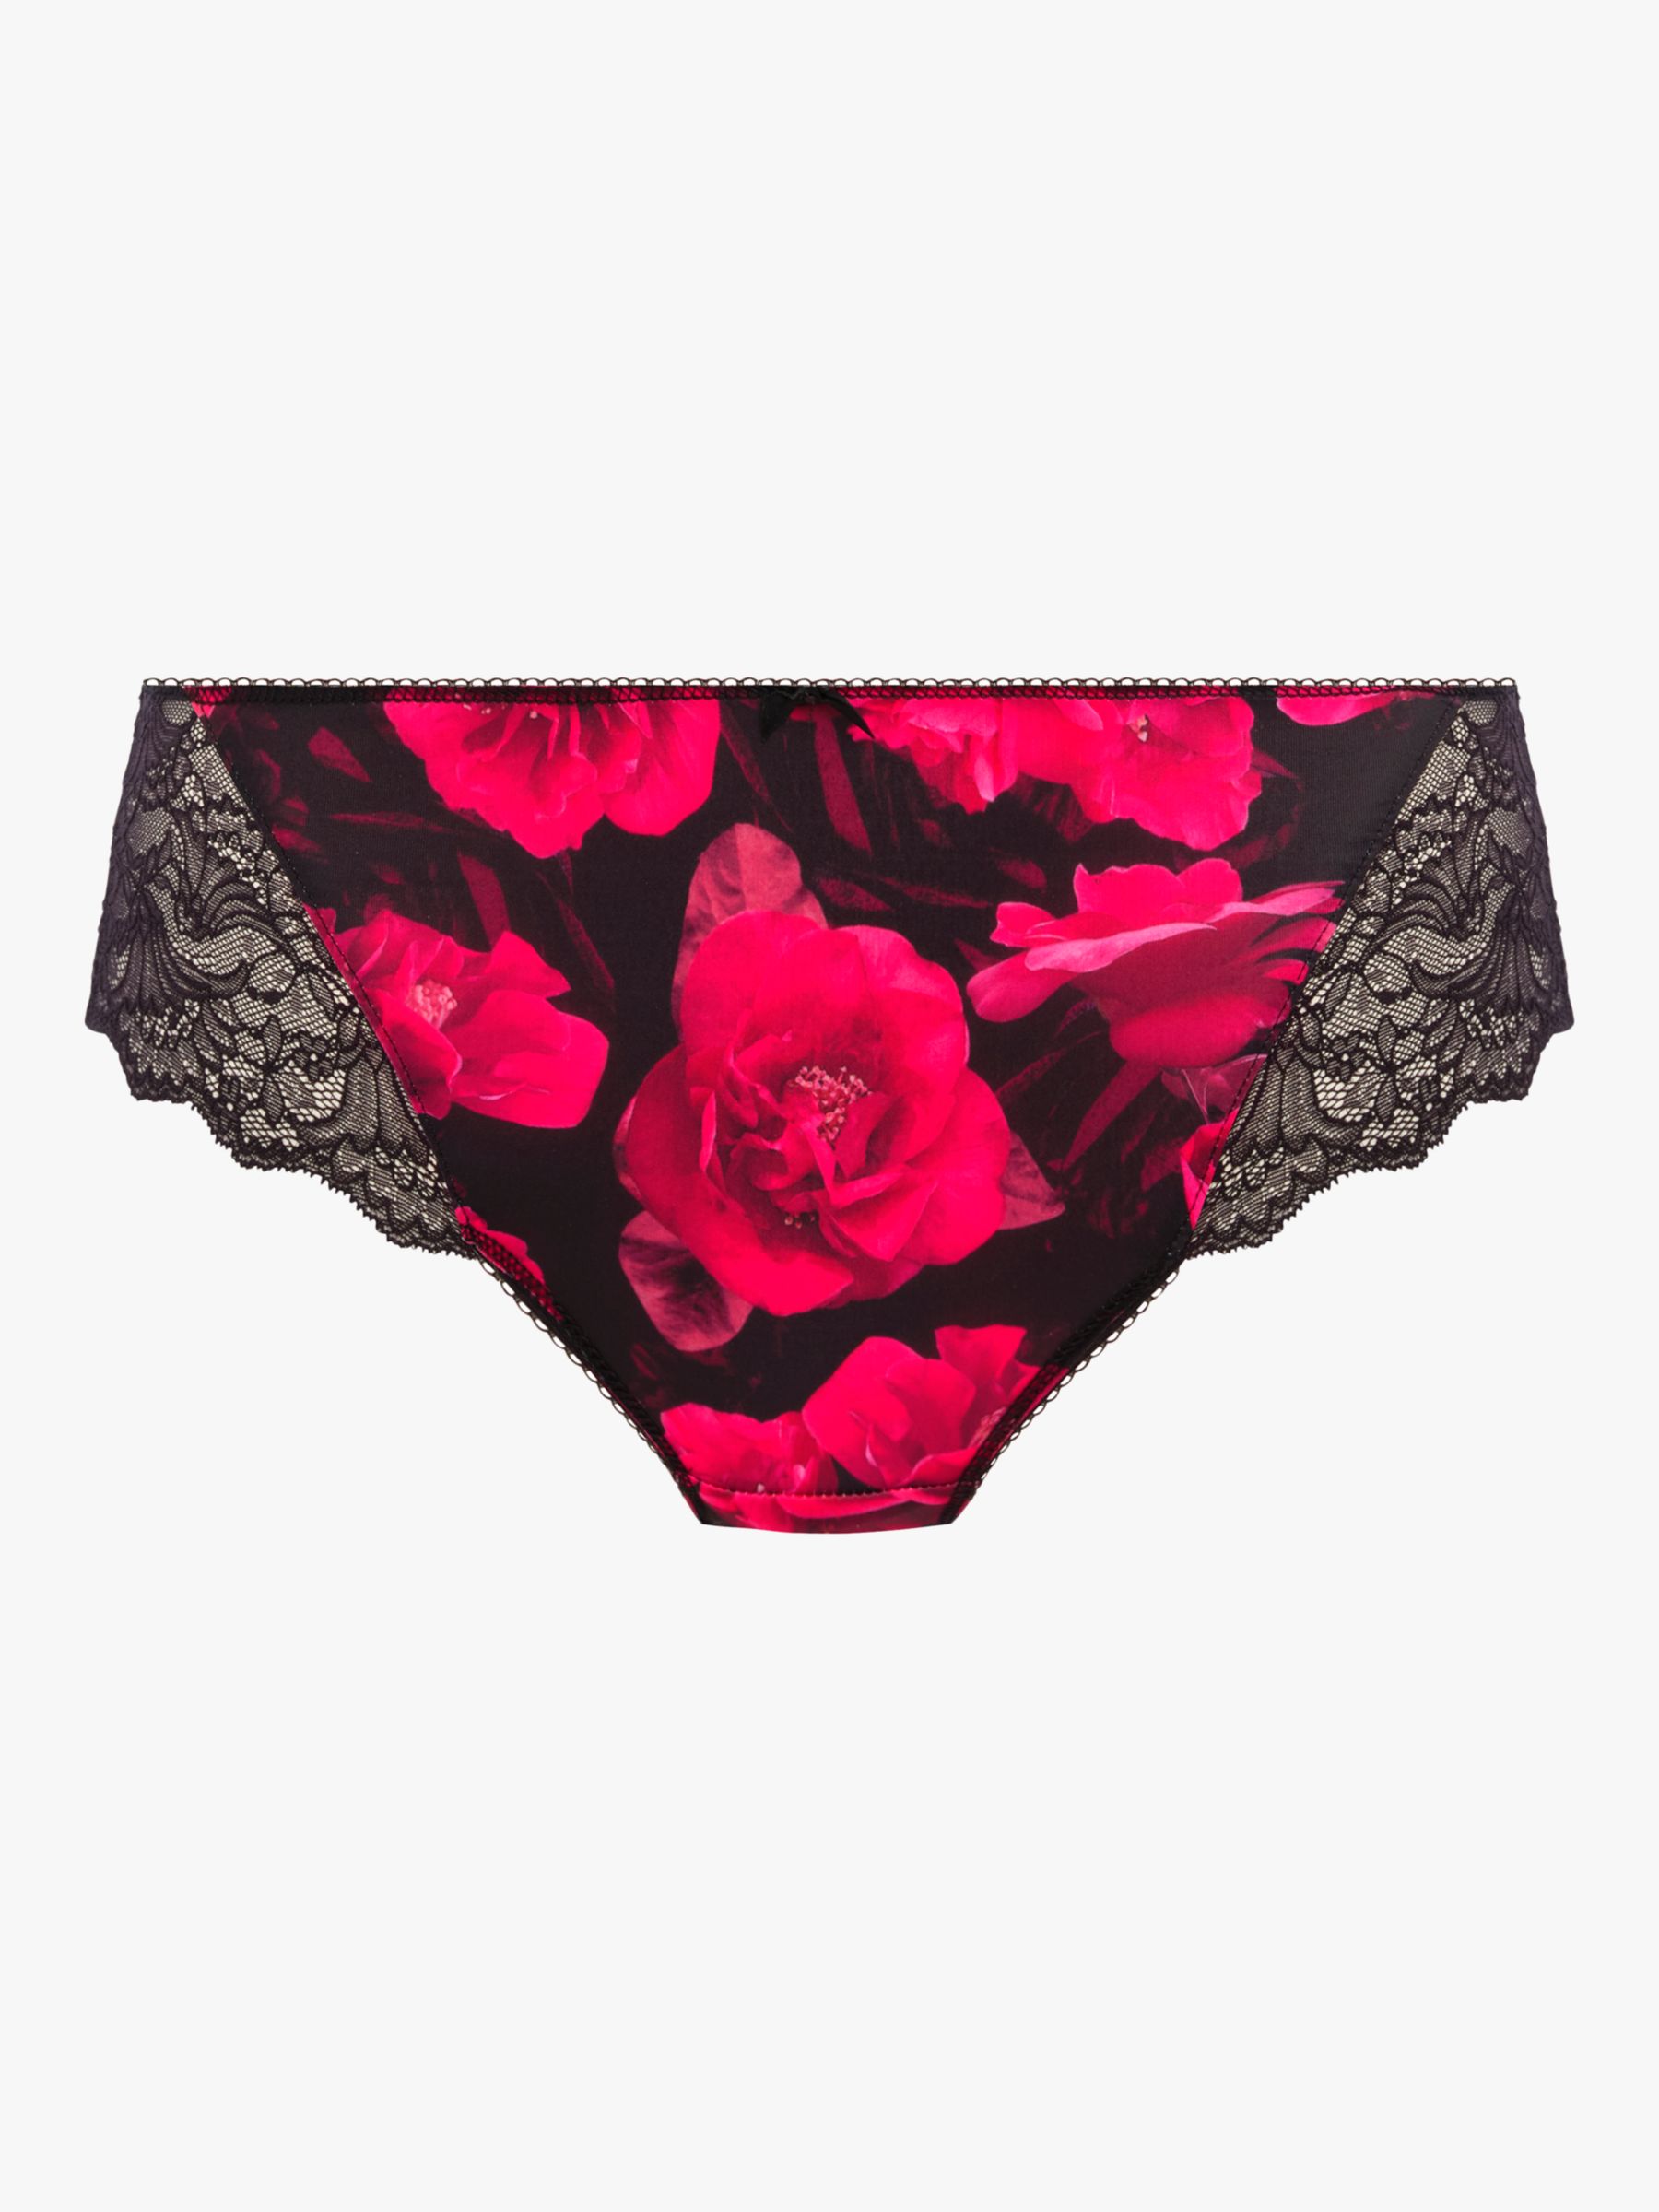 Fantasie Lucia Floral Print Shorty Knickers, Red at John Lewis & Partners